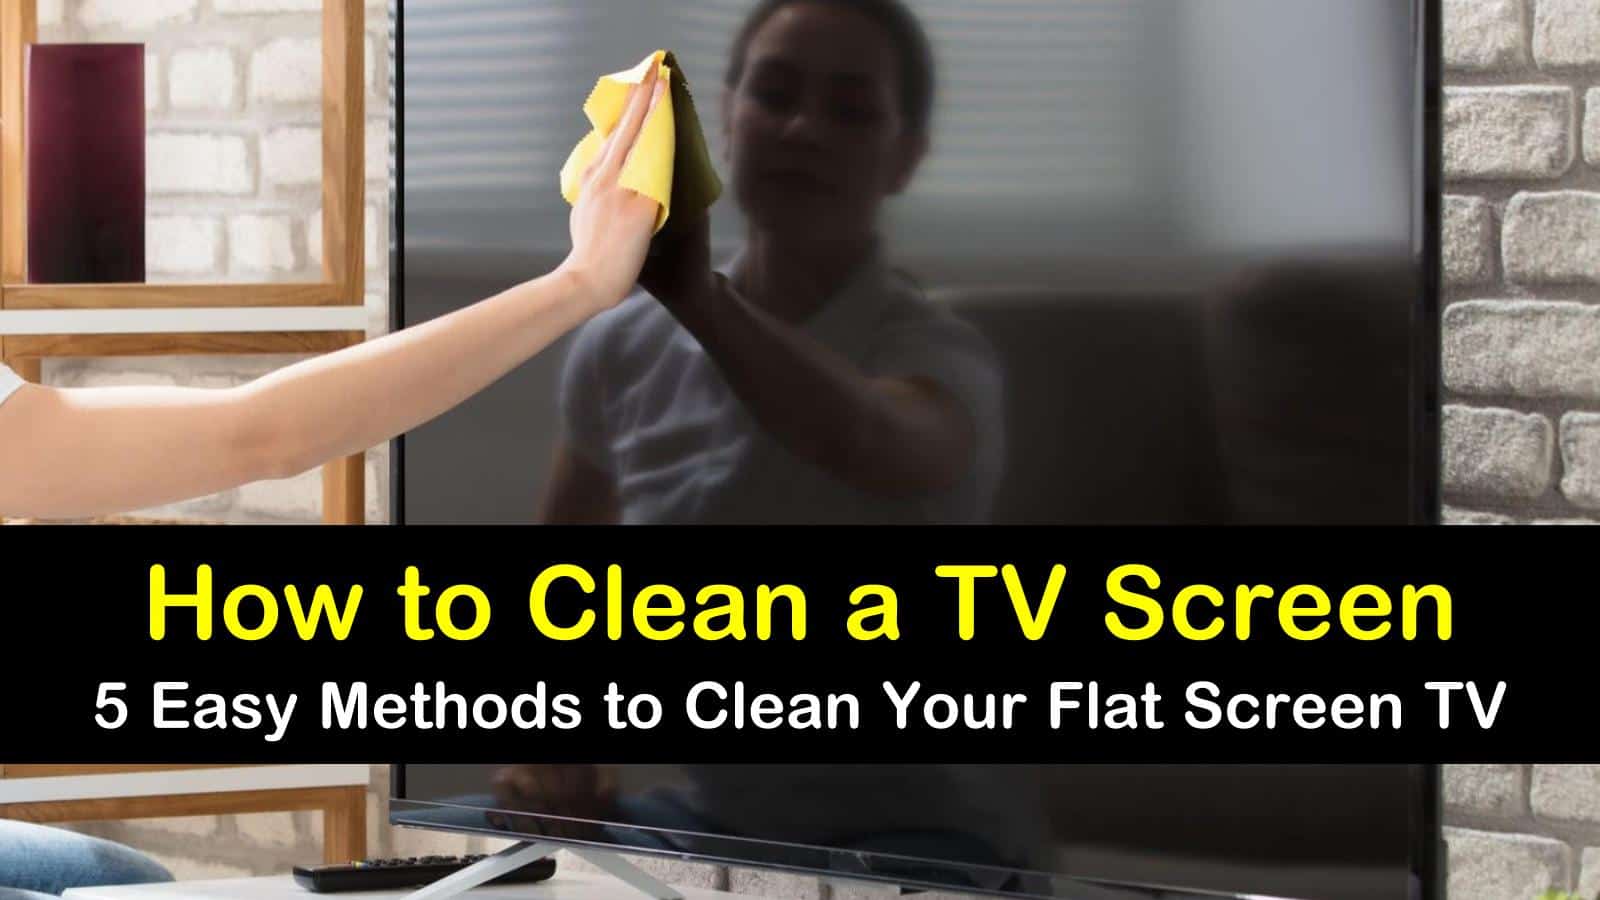 5 Simple Ways to Clean a TV Screen